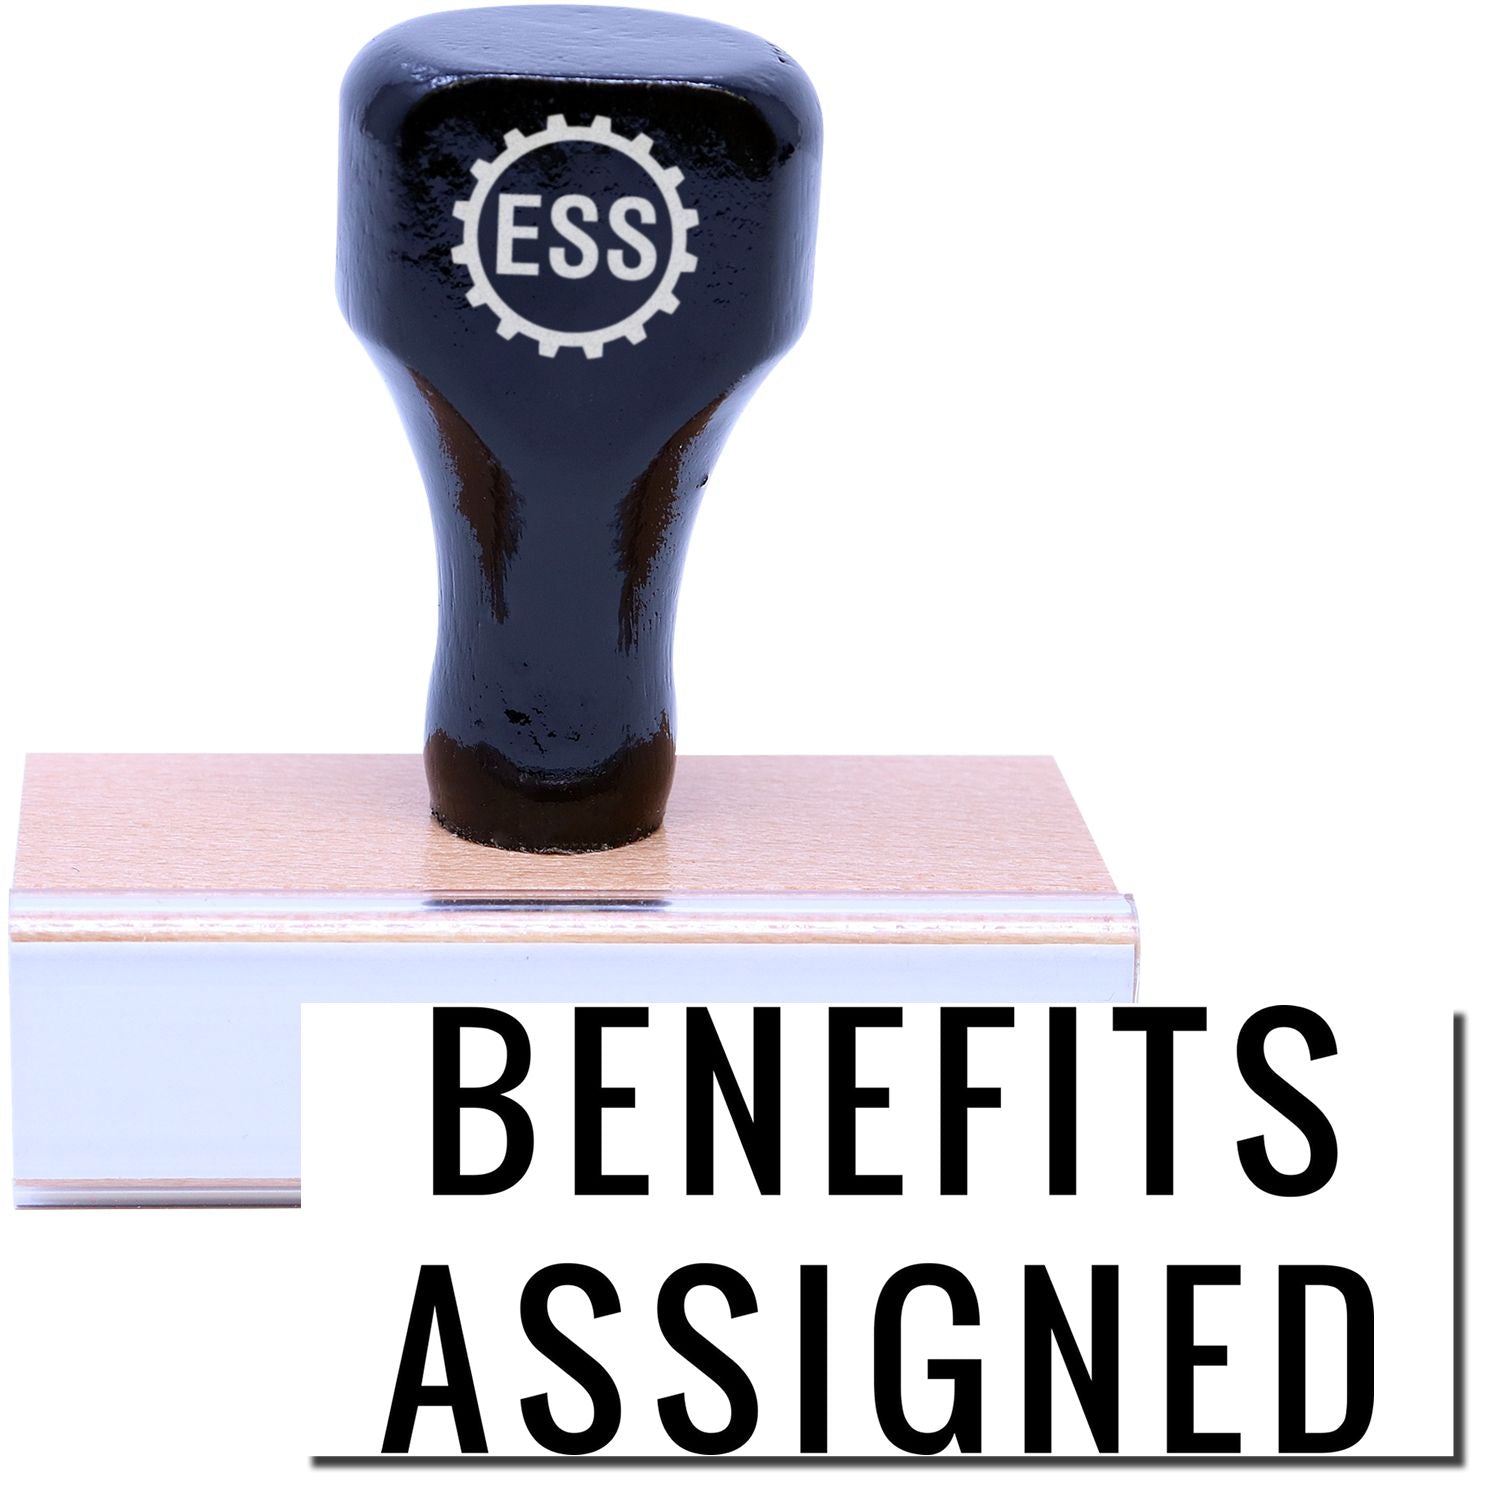 A stock office rubber stamp with a stamped image showing how the text "BENEFITS ASSIGNED" in a large narrow font is displayed after stamping.